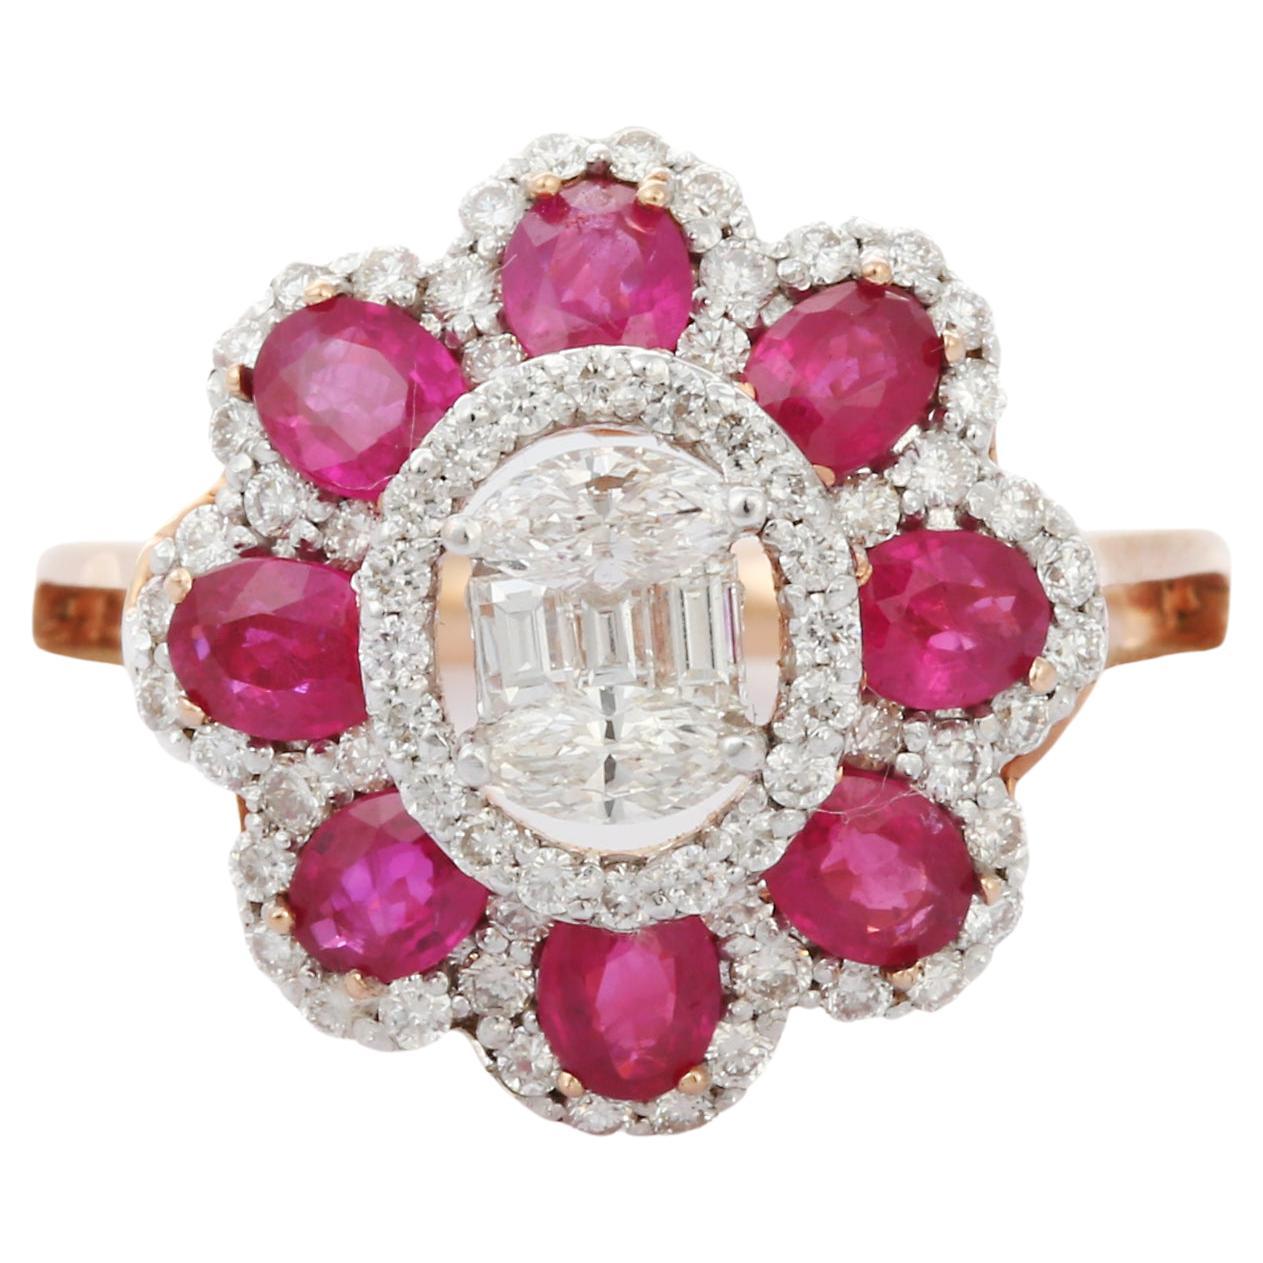 18K White Gold Oval cut Ruby Flower Cocktail Ring with Diamonds 